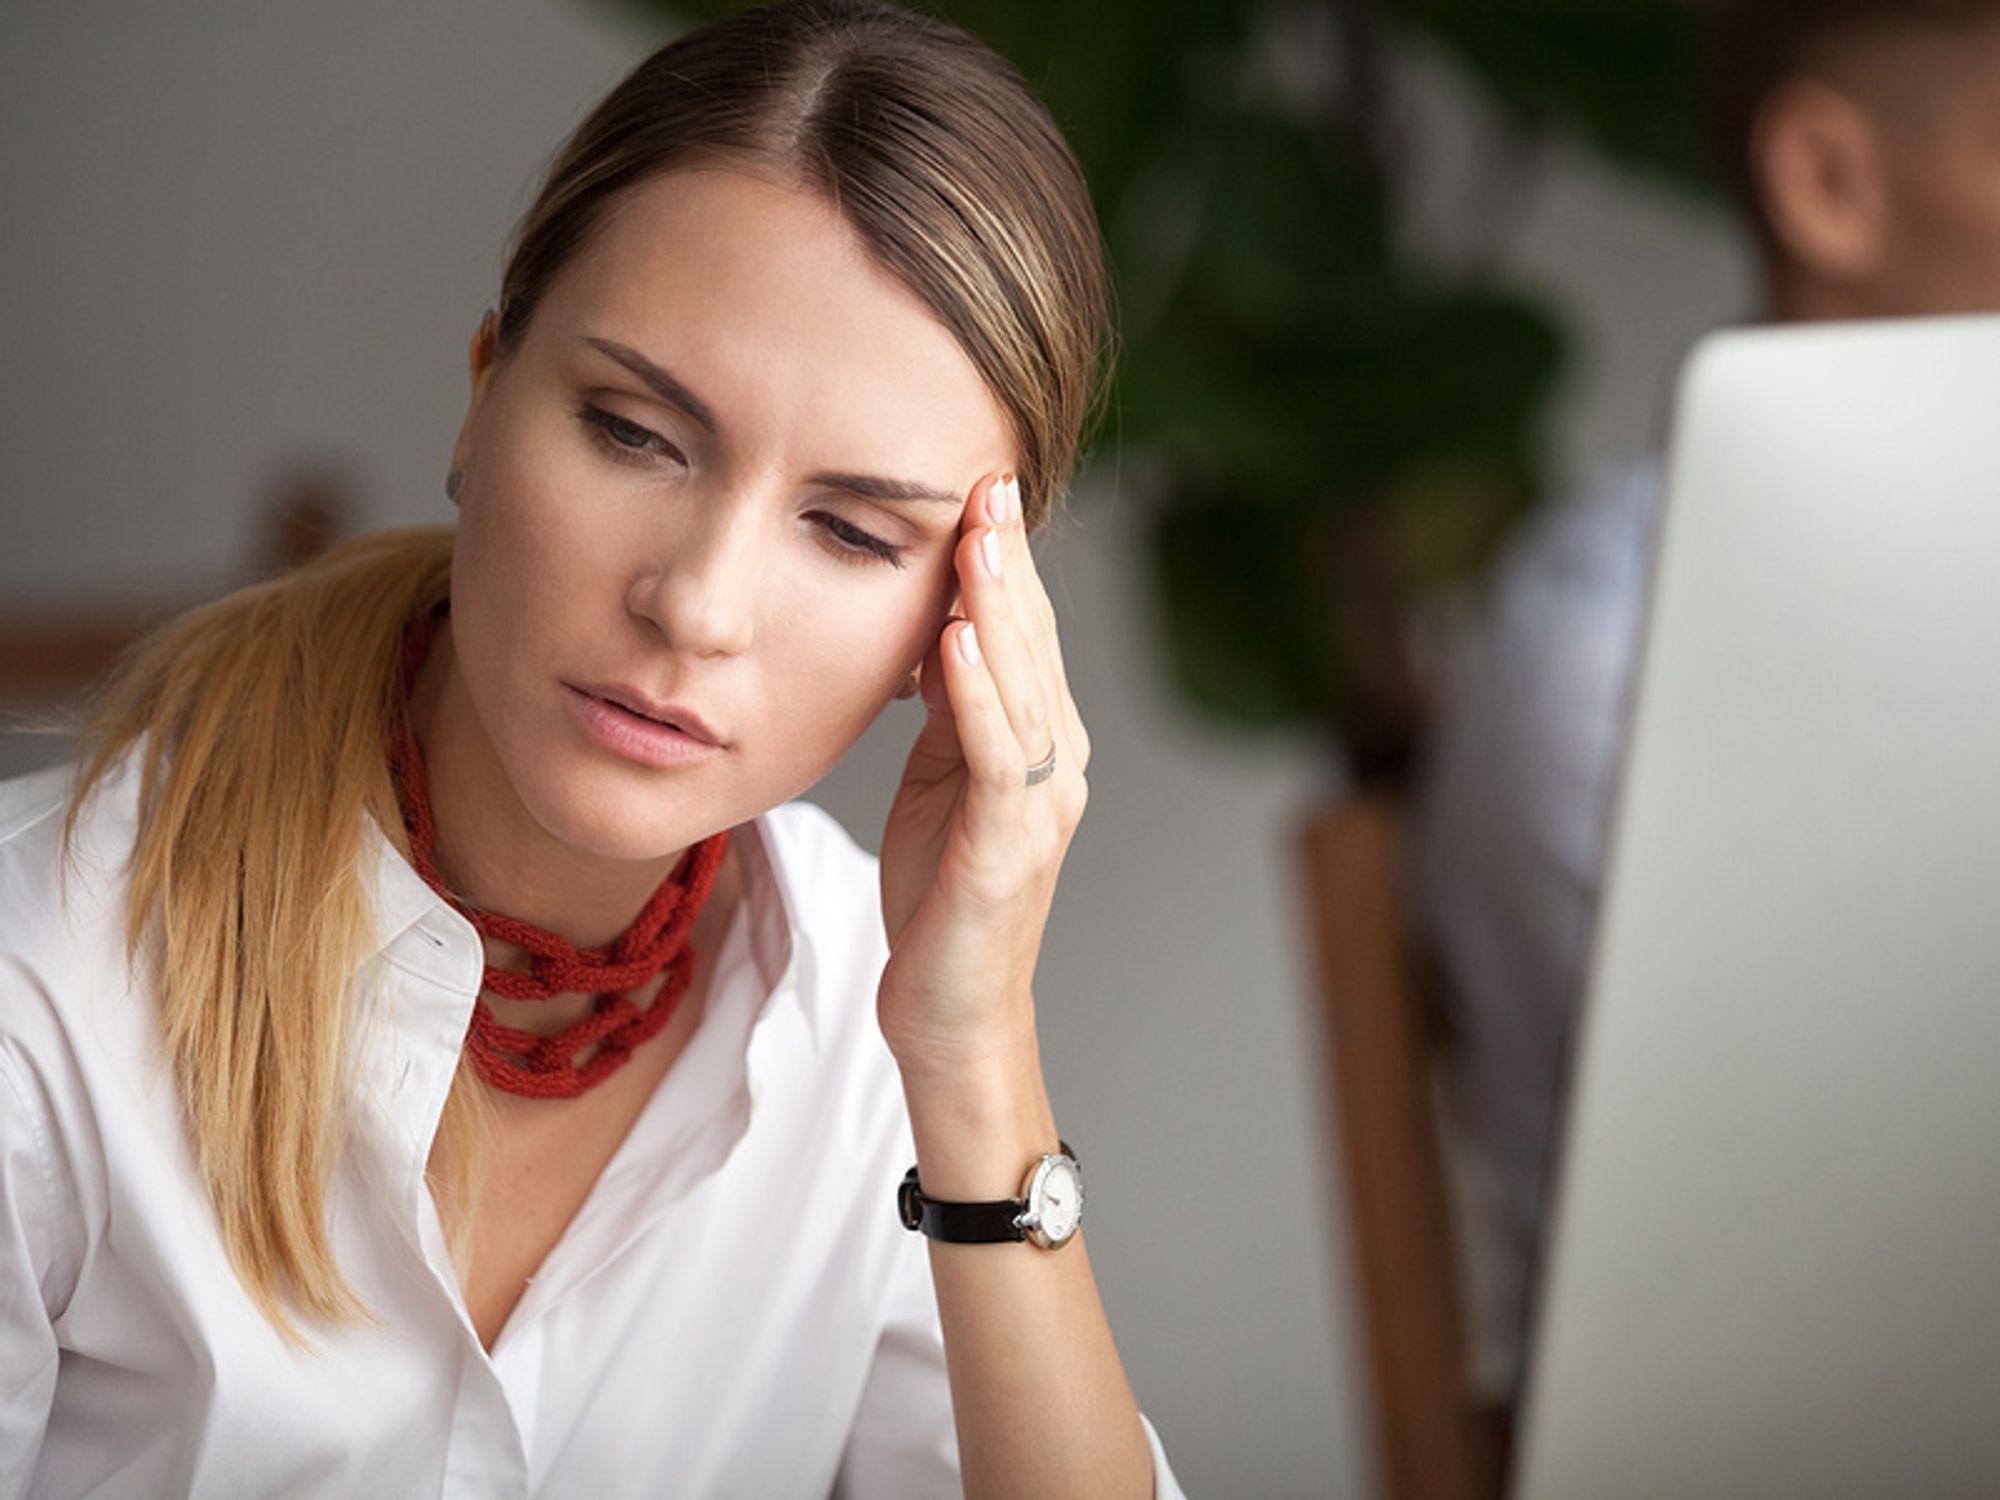 Frustrated employee feels lost on her current career path.